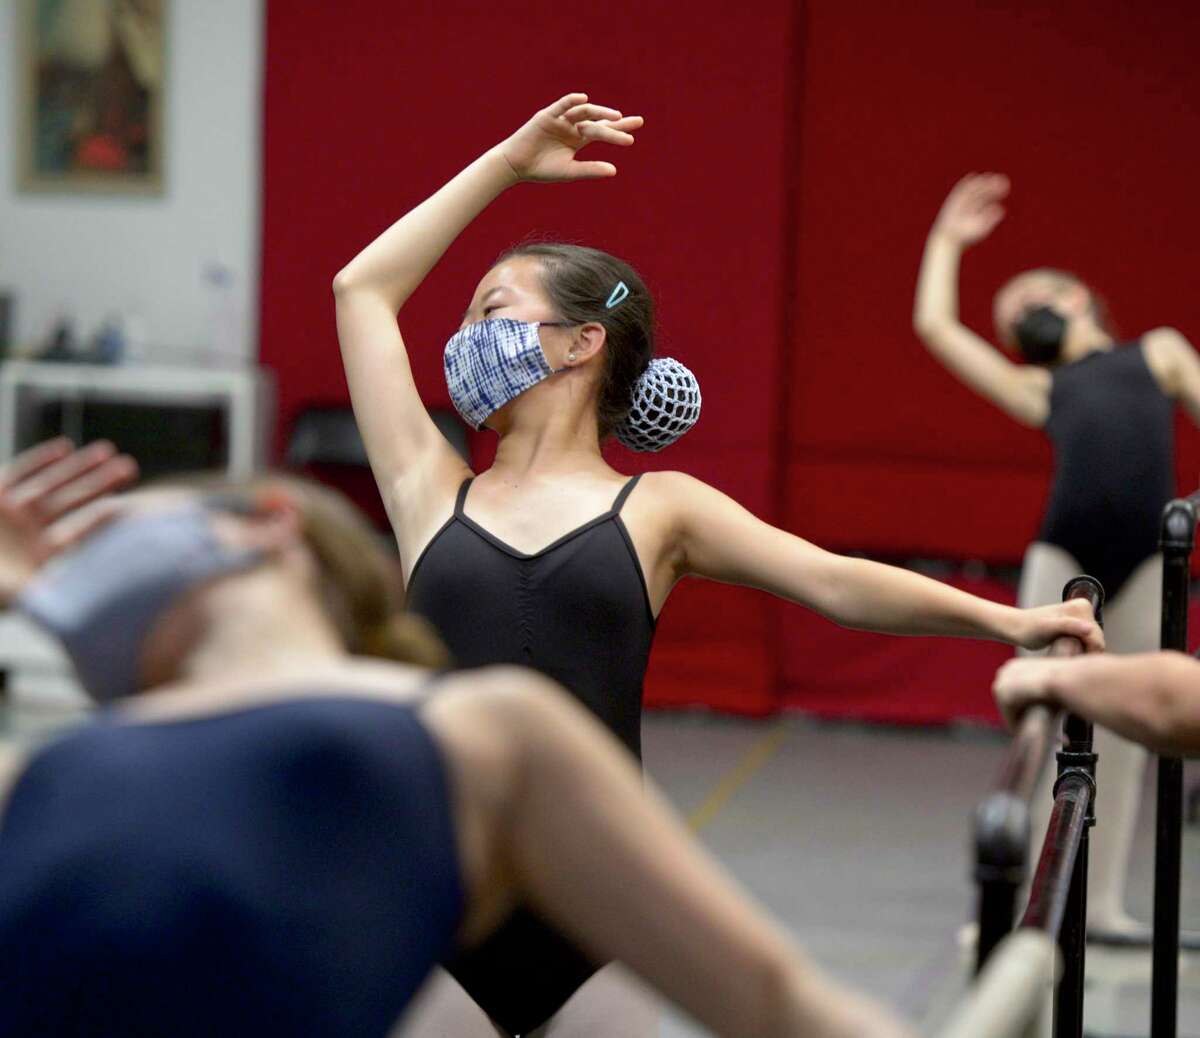 Hadley Hopke participates in a class at The Ridgefield Conservatory of Dance. The conservatory is the only nonprofit dance school in the town's designated cultural district. July 23, 2021, in Ridgefield, Conn.